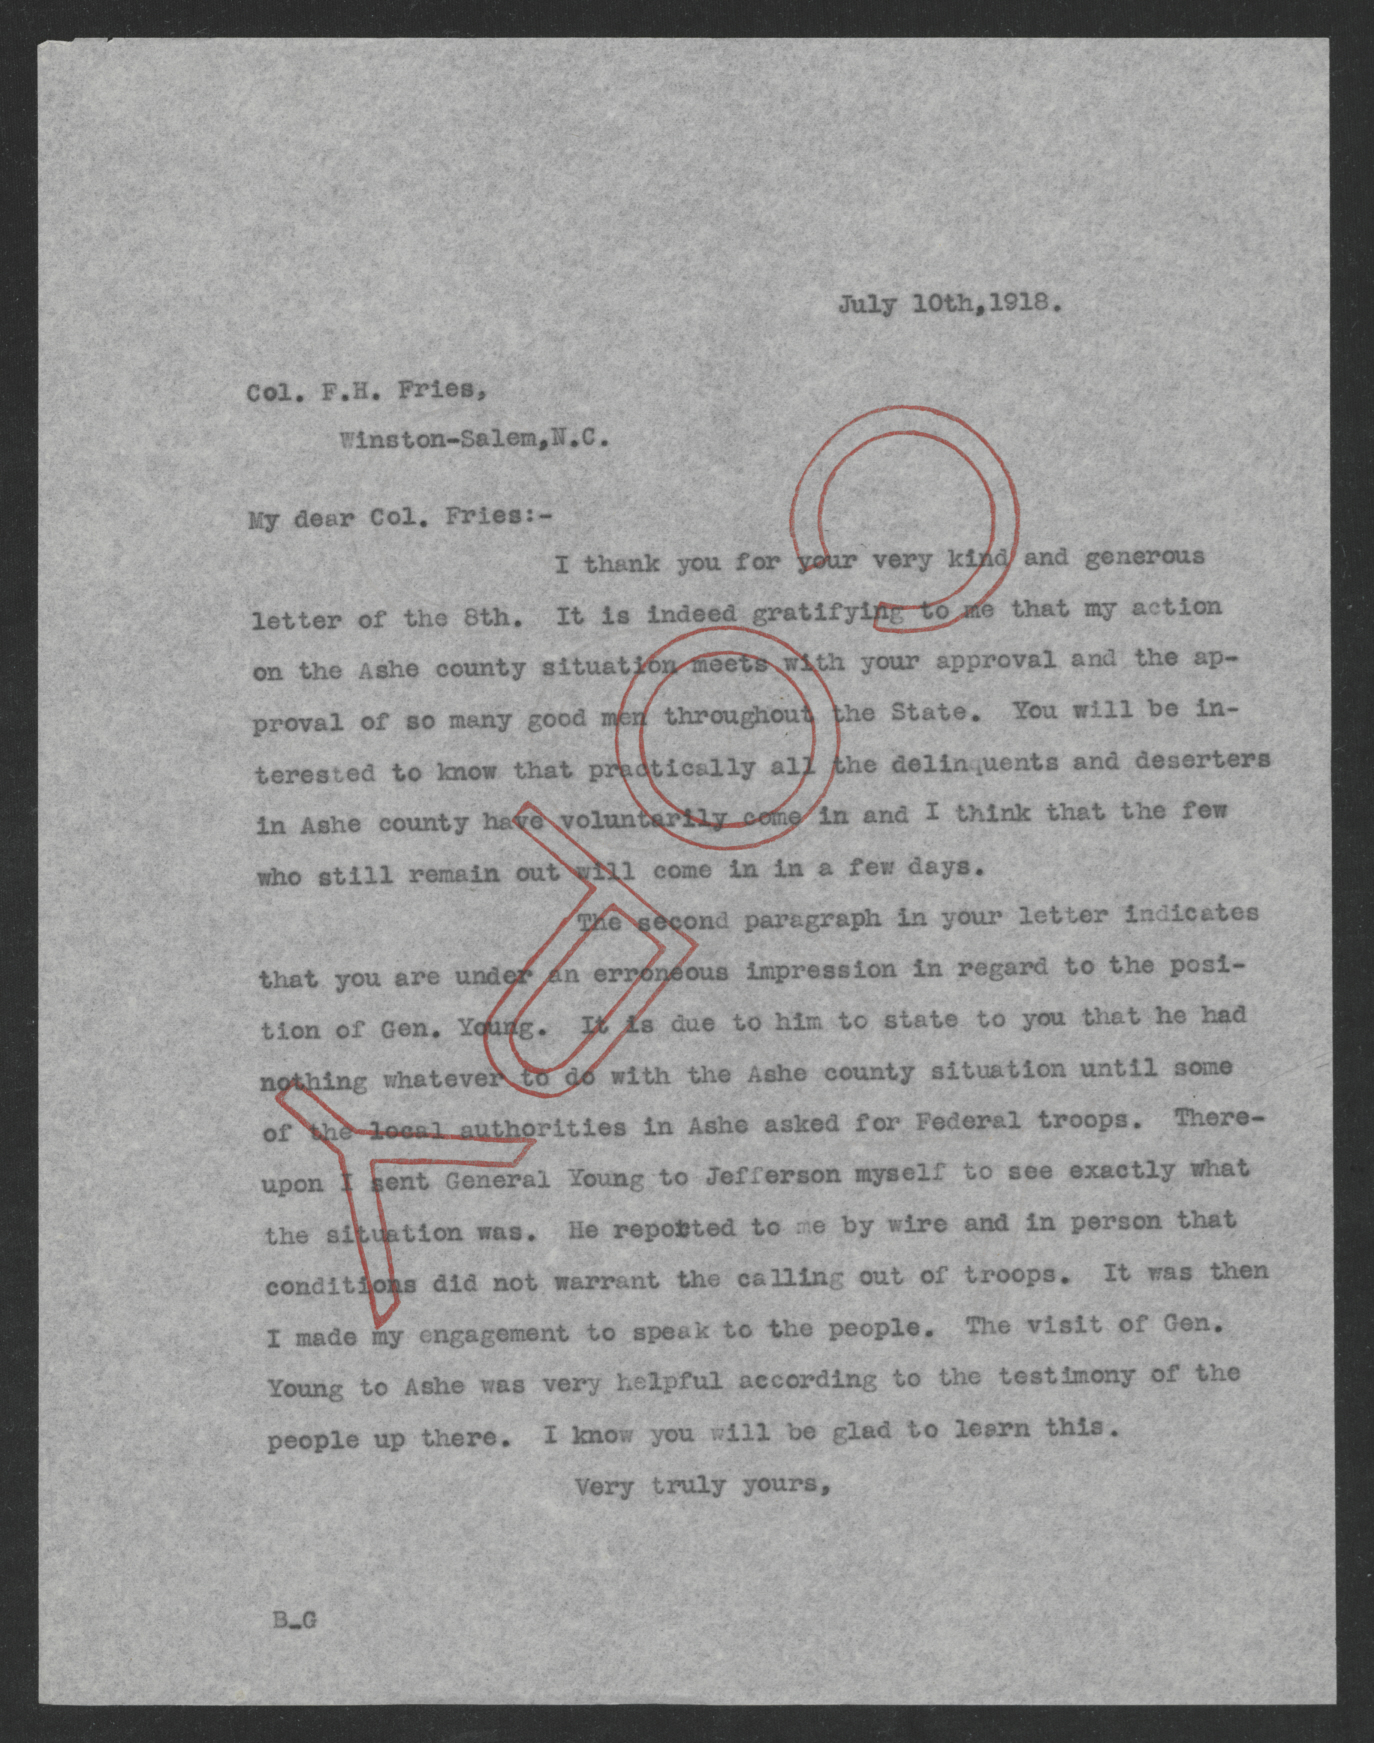 Letter from Thomas W. Bickett to Francis H. Fries, July 10, 1918